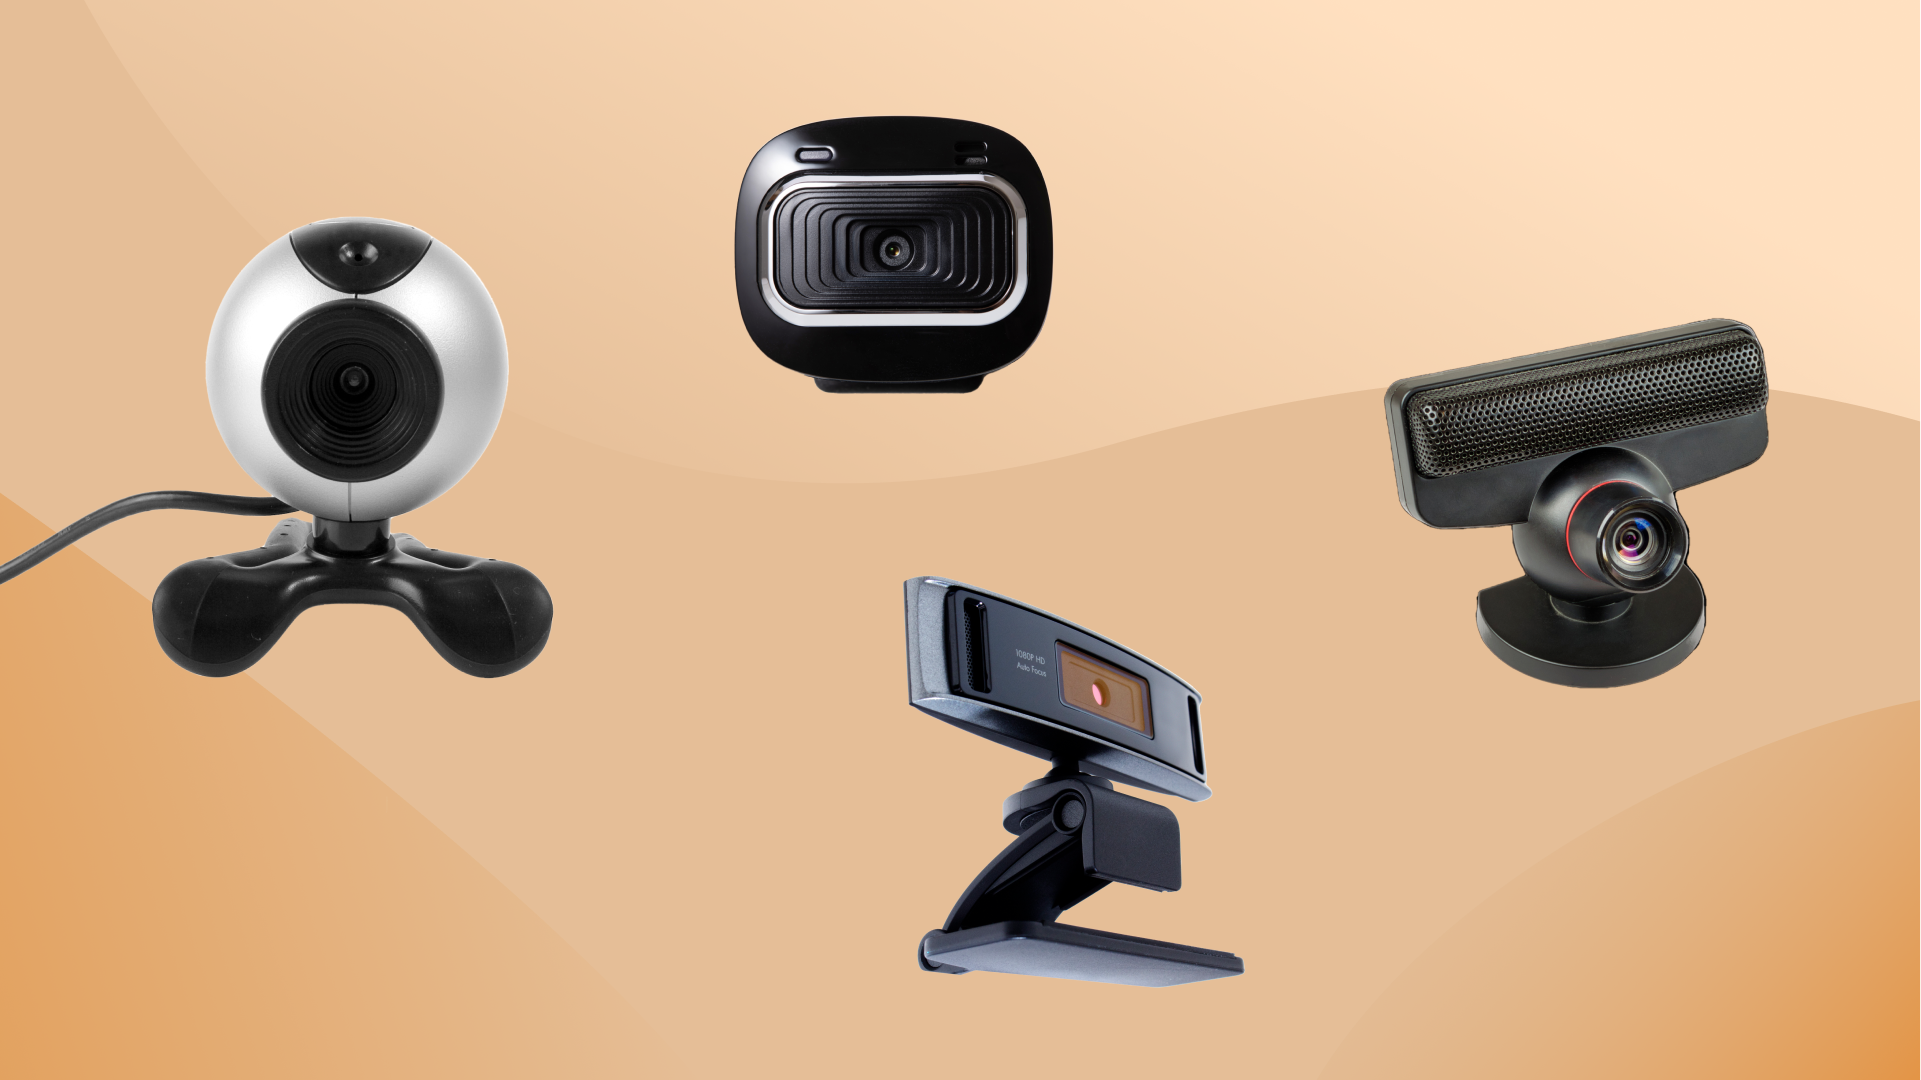 Examples of the best webcams for your virtual event or conferencing setup